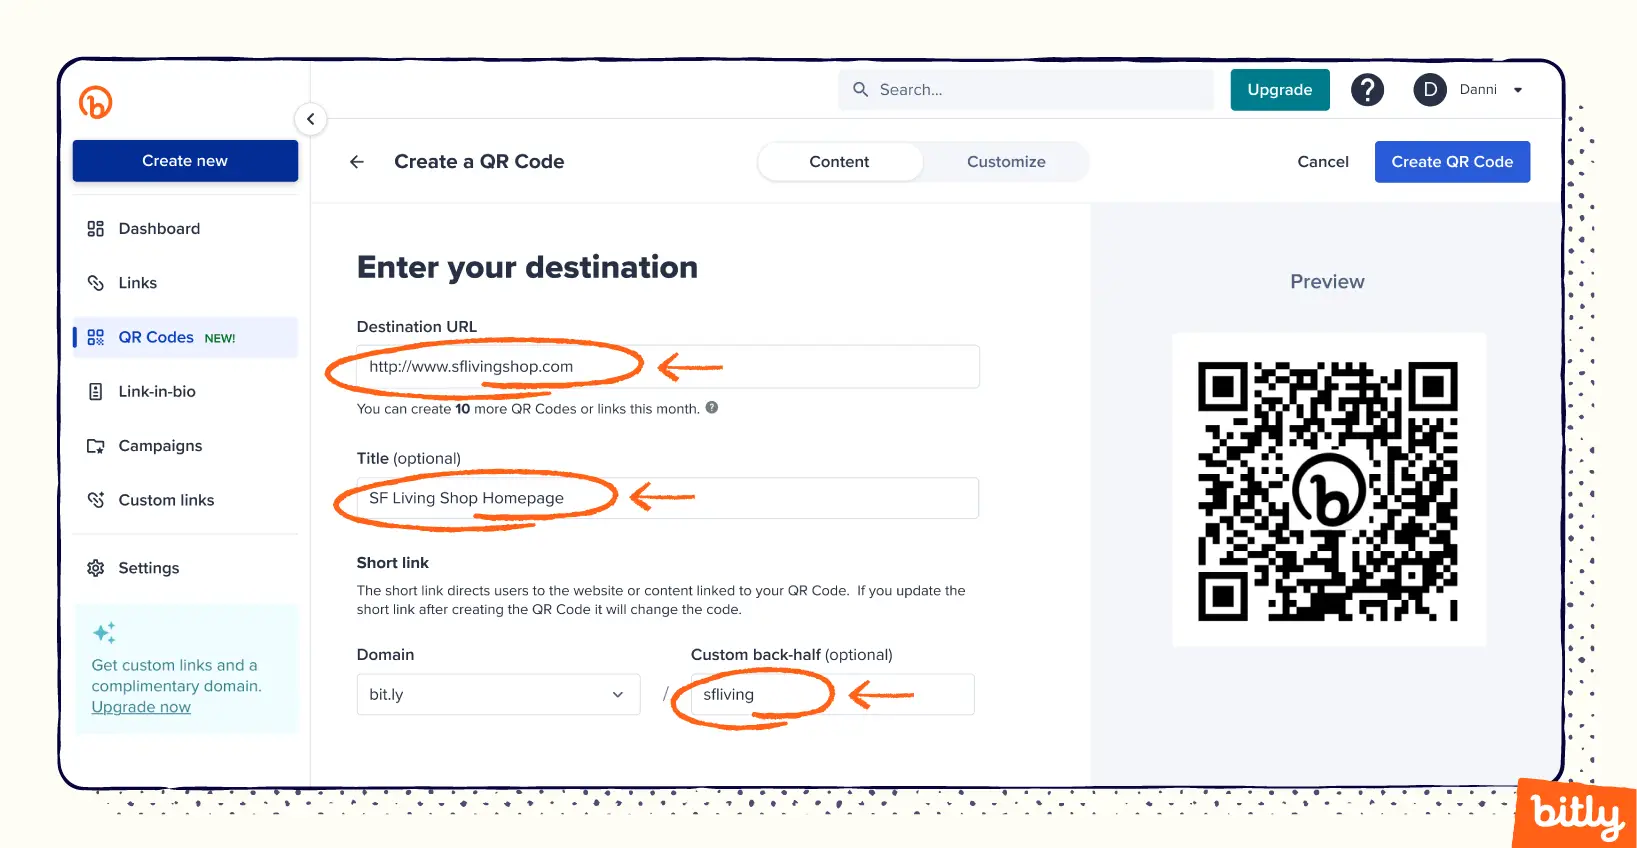 The creation process of making a QR Code in the Bitly app. 